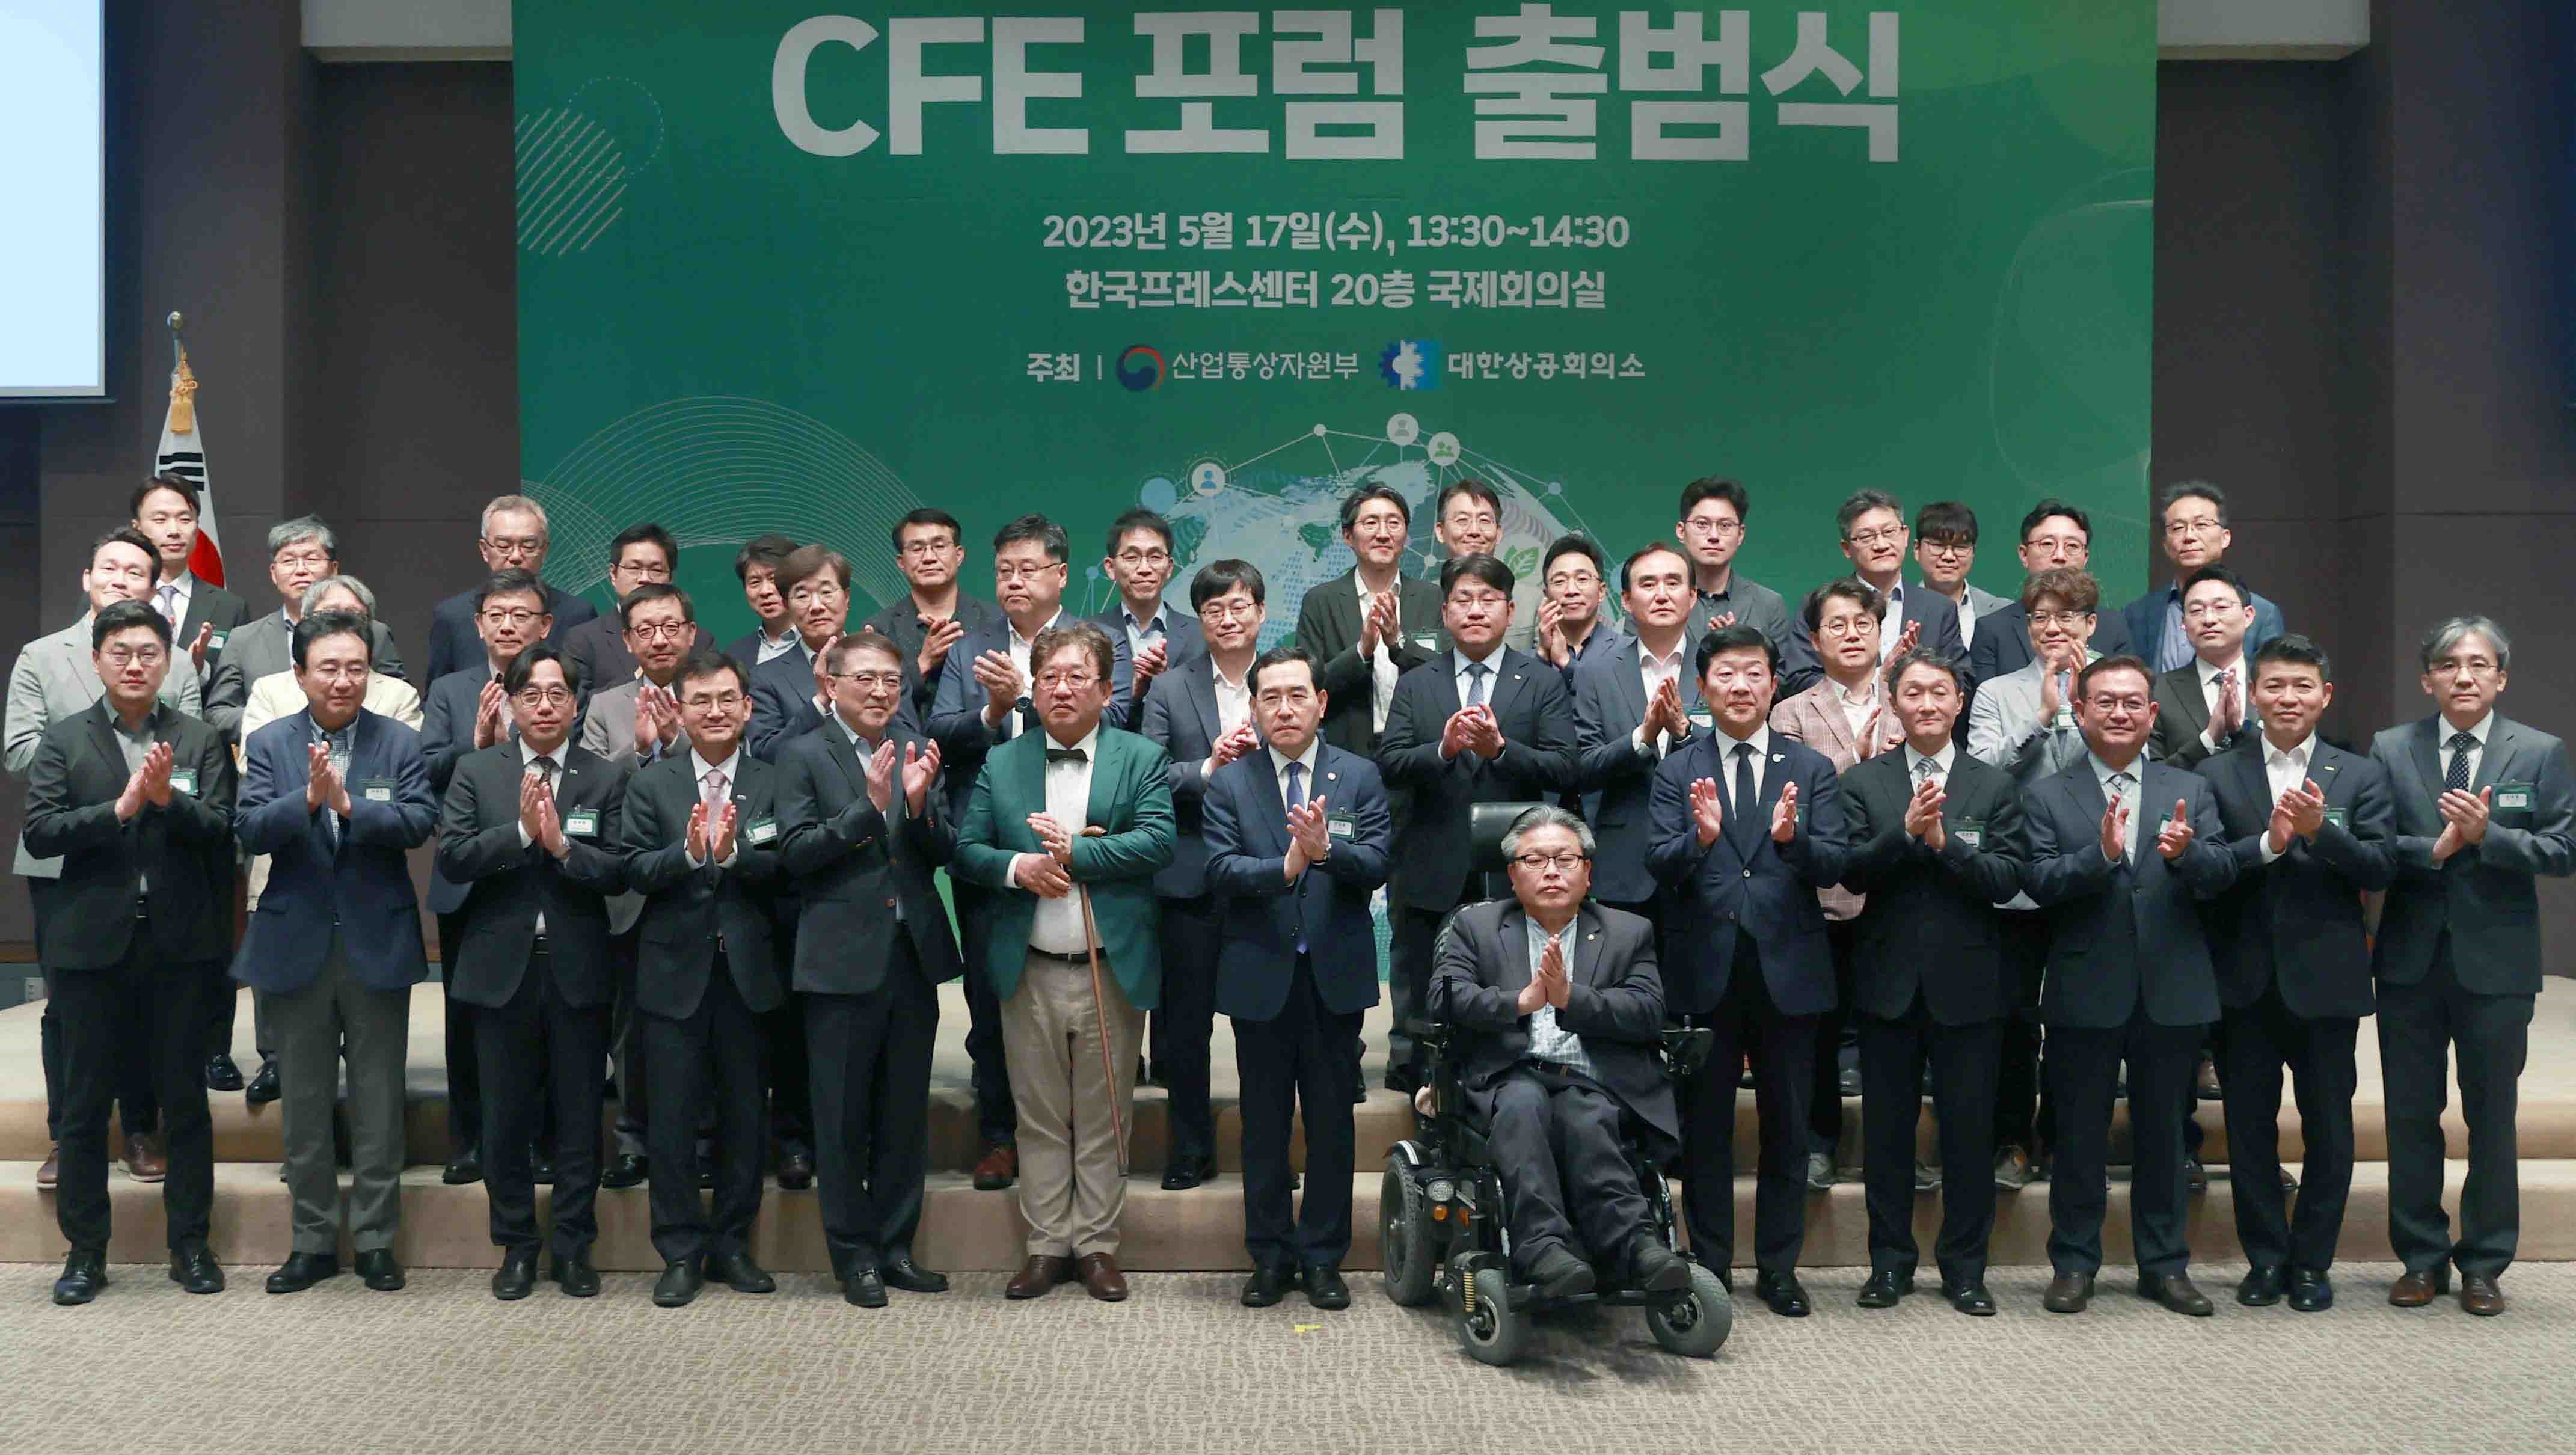 Minister Lee attends Carbon-Free Energy Forum launching ceremony